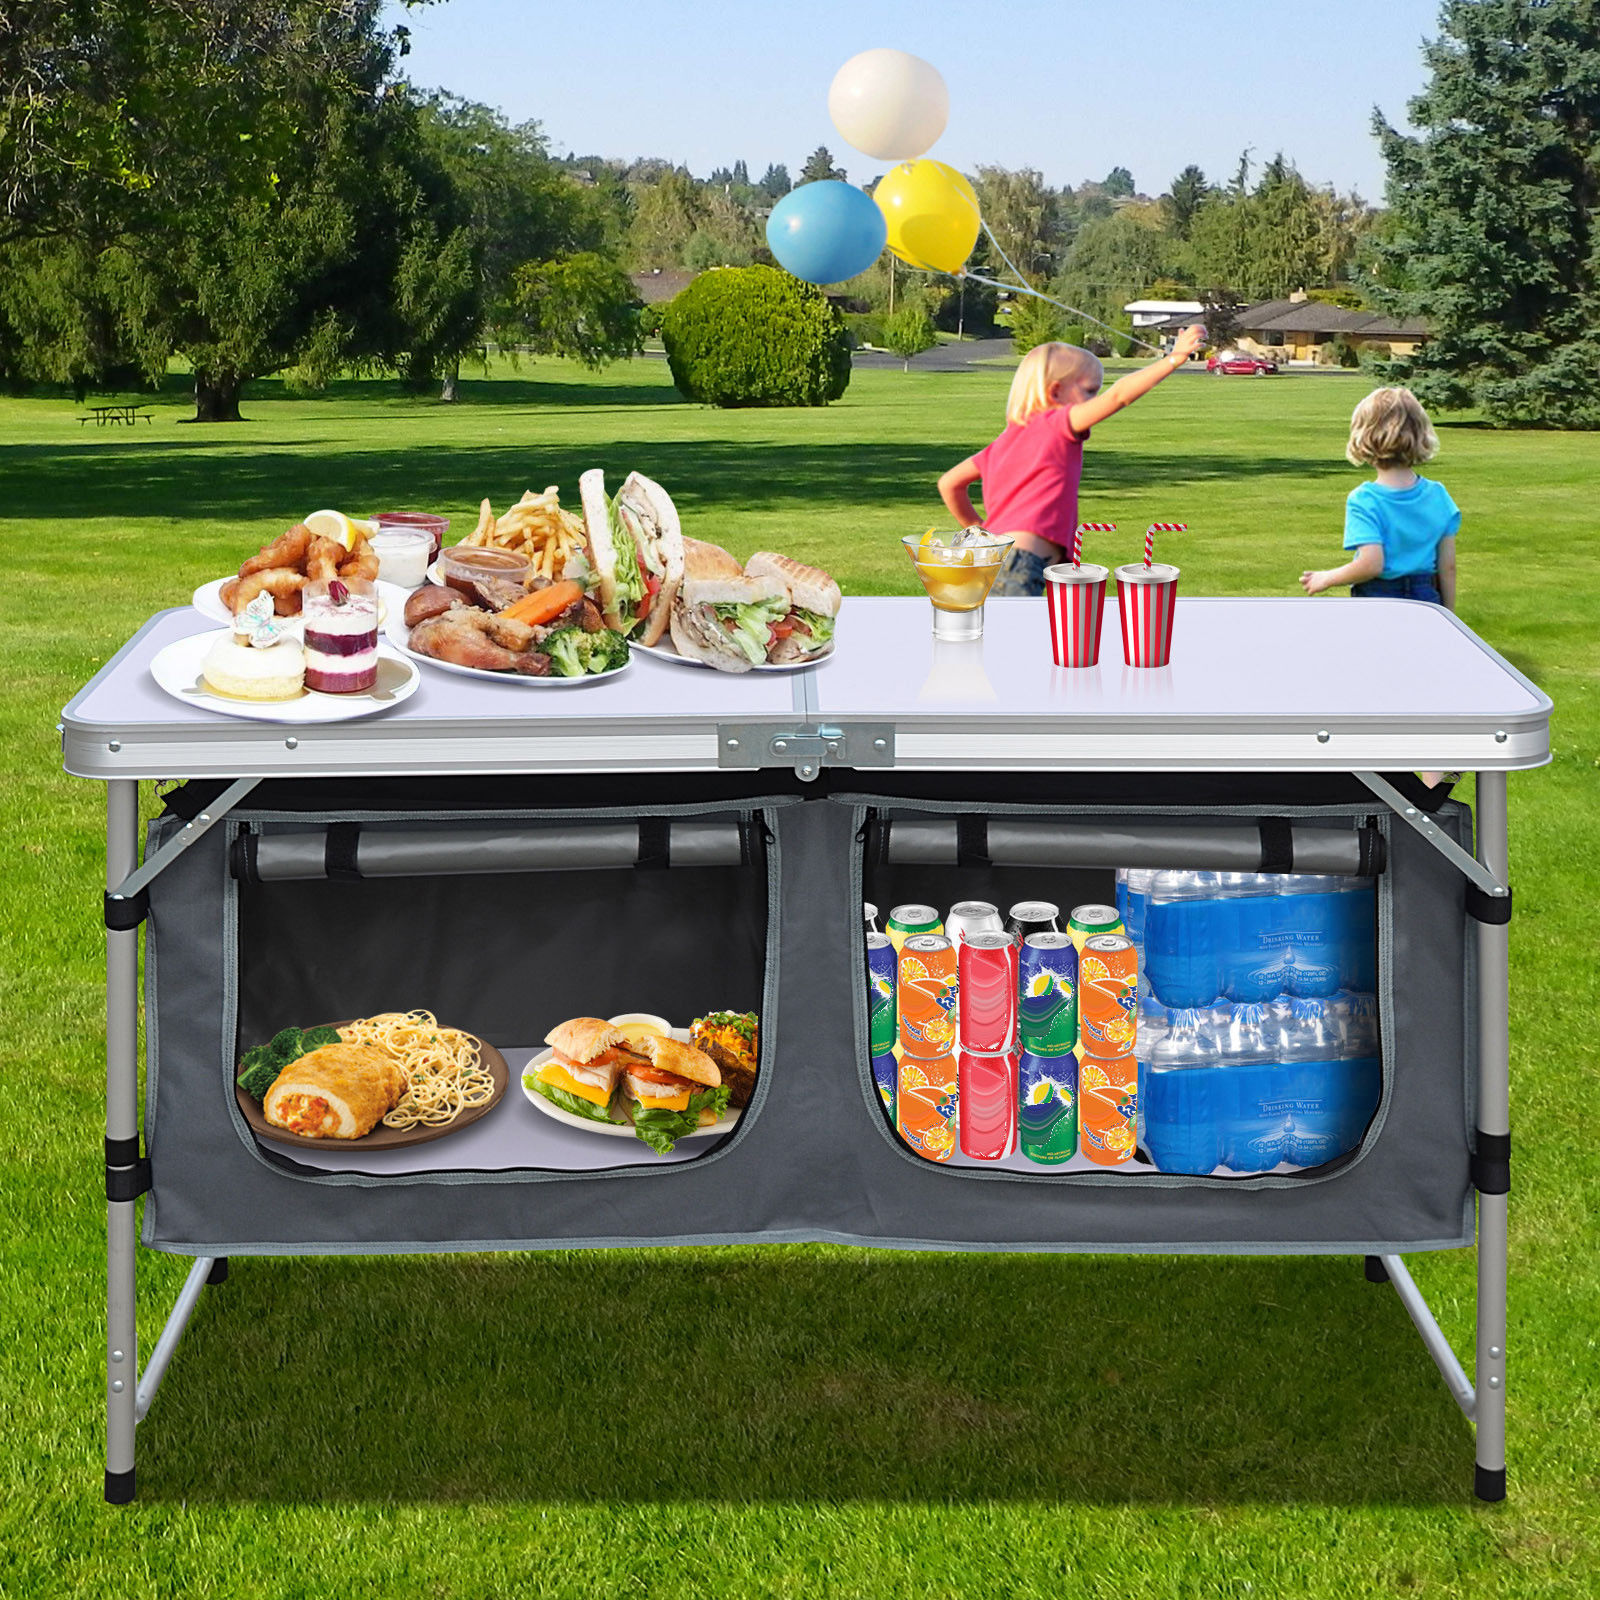 Sunrise Outdoor Folding Table 47 Inch Aluminum Lightweight Camping Picnic Table Adjustable Height with Storage Organizer - image 1 of 11